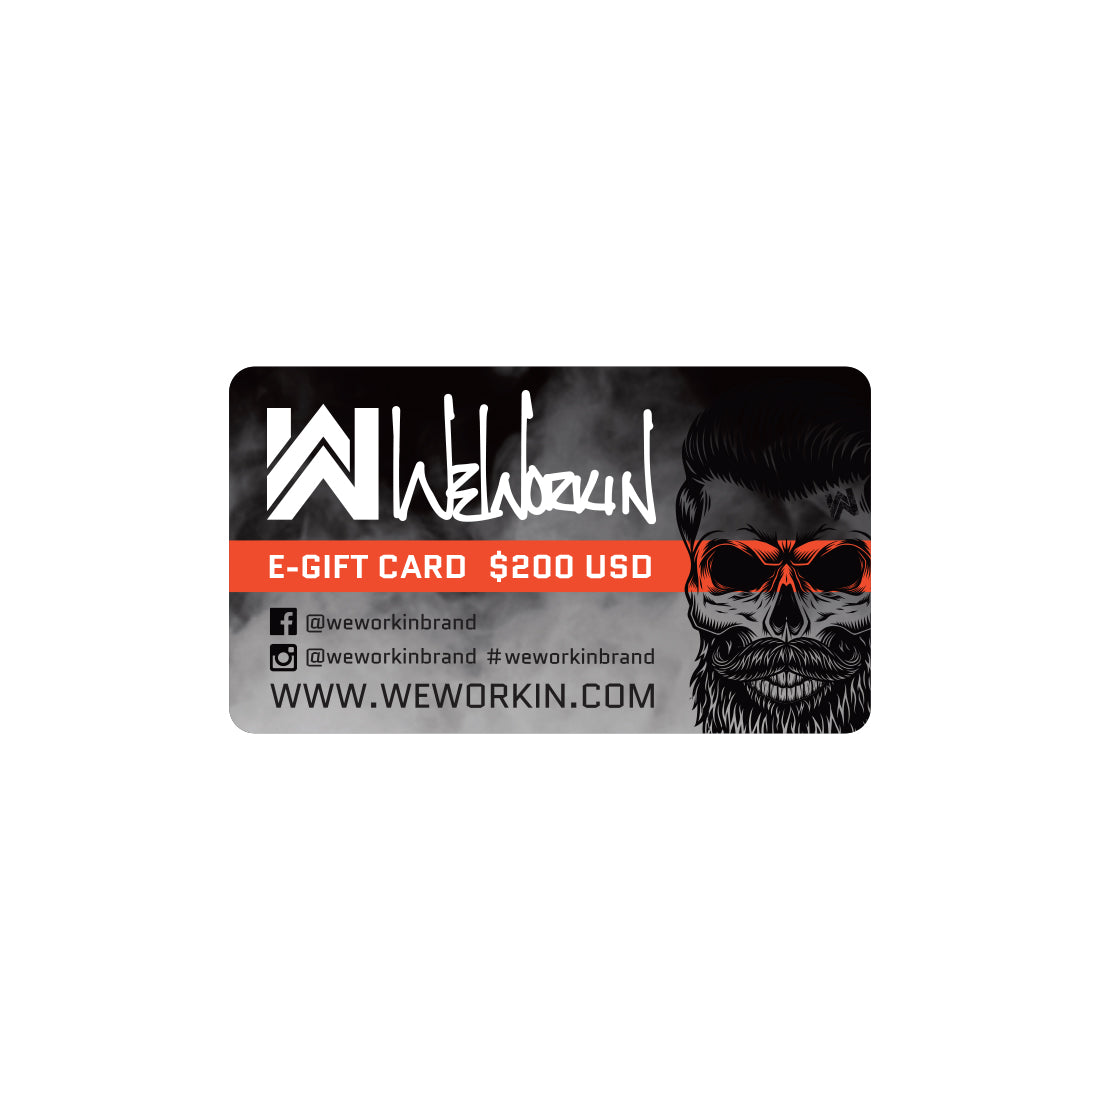 Virtual WeWorkin e-Gift card on a white background. $200 USD value pictured.